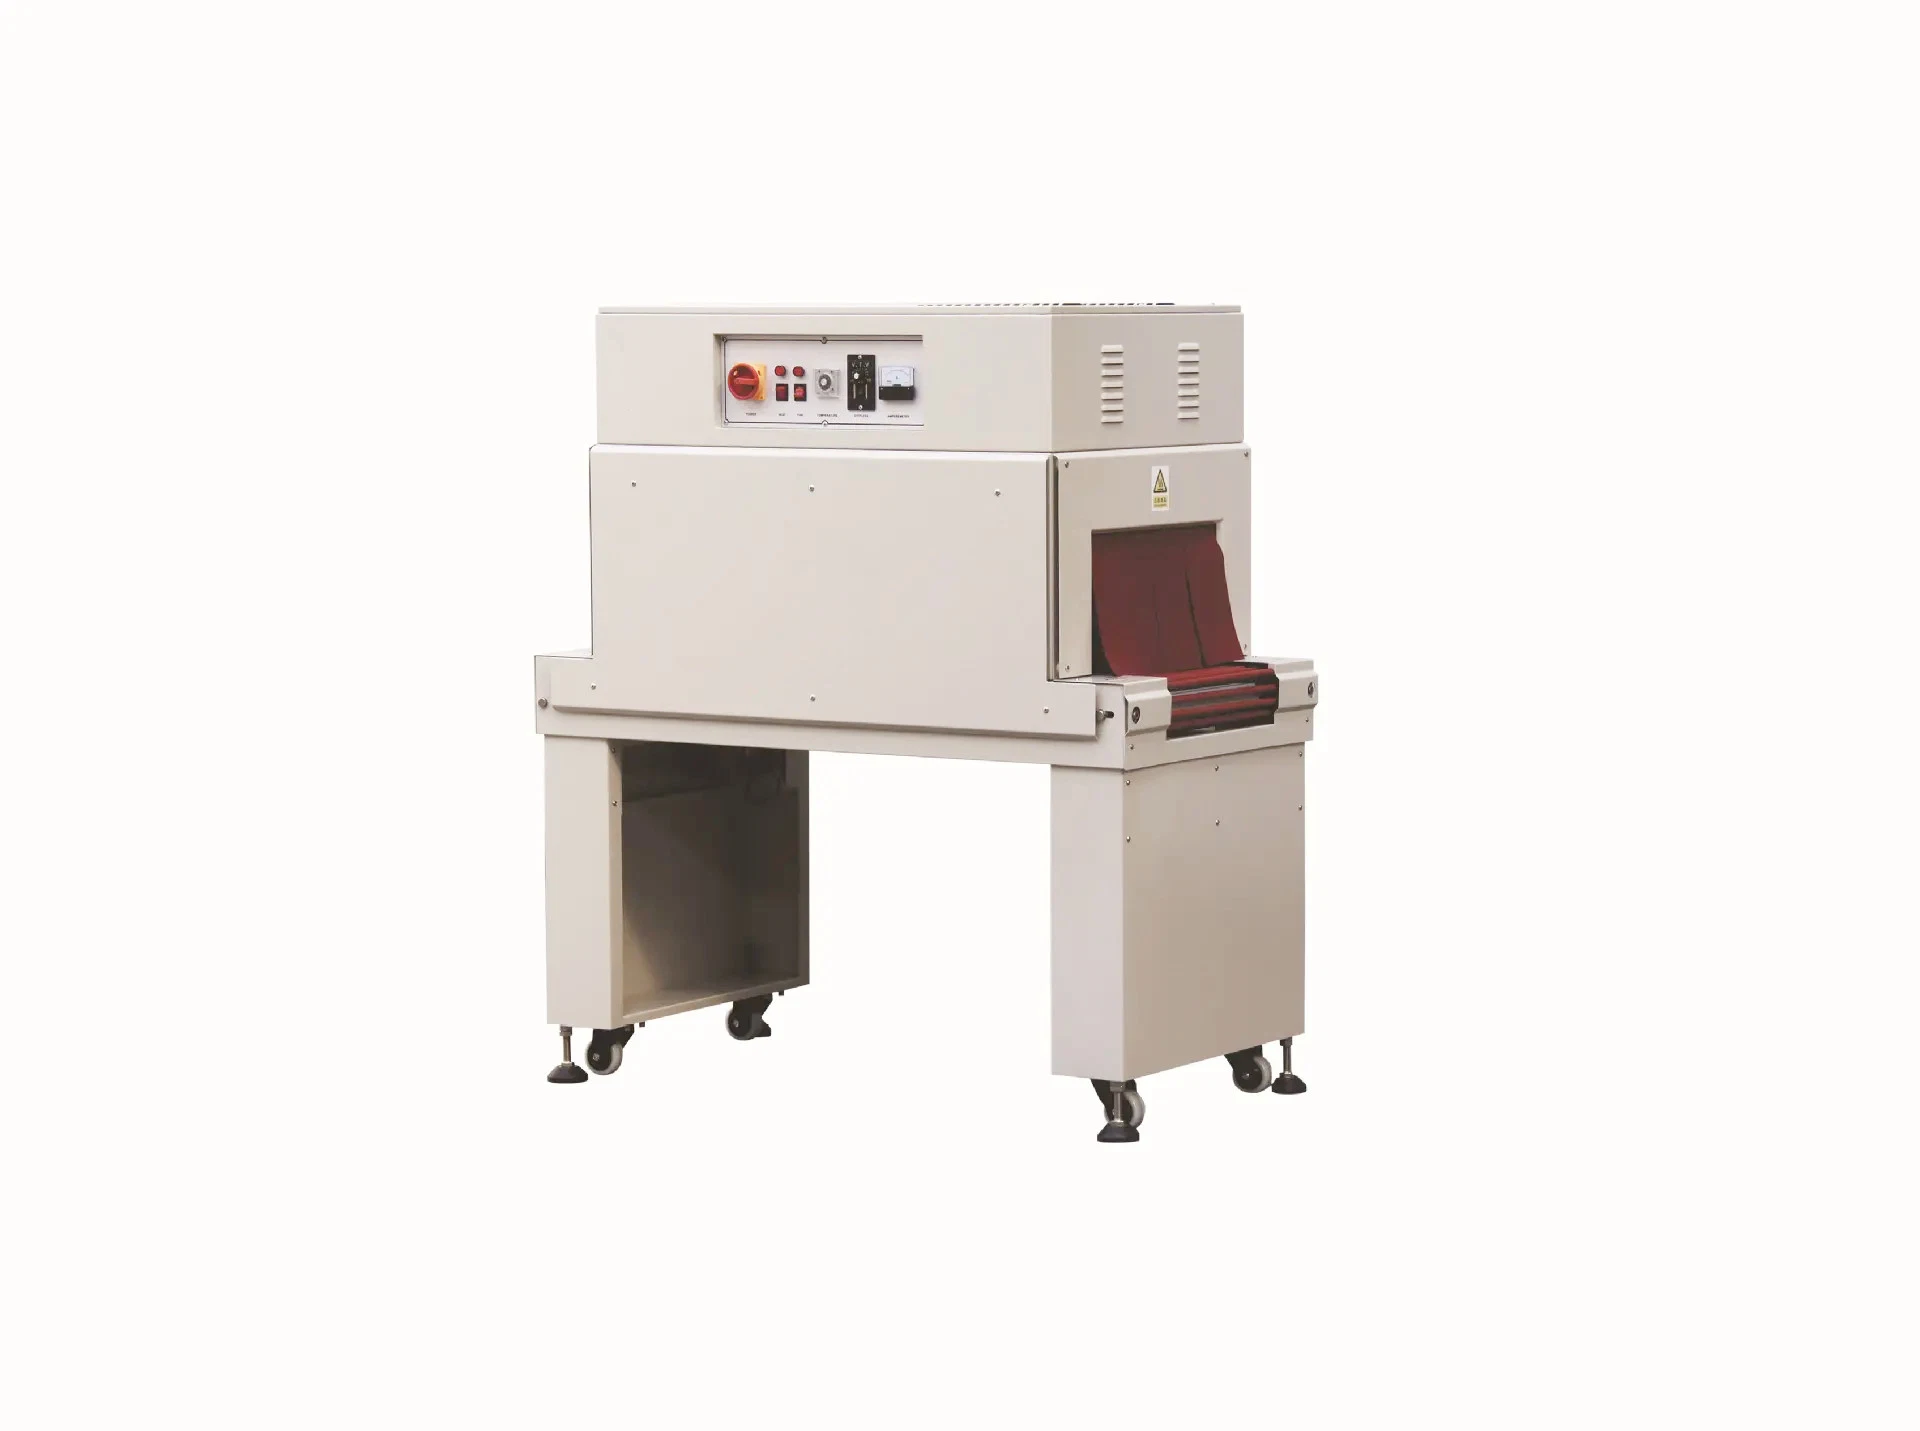 Auto Wrapper Shrink Wrap Machine Automatic Packaging Shrink Wrapping Machine